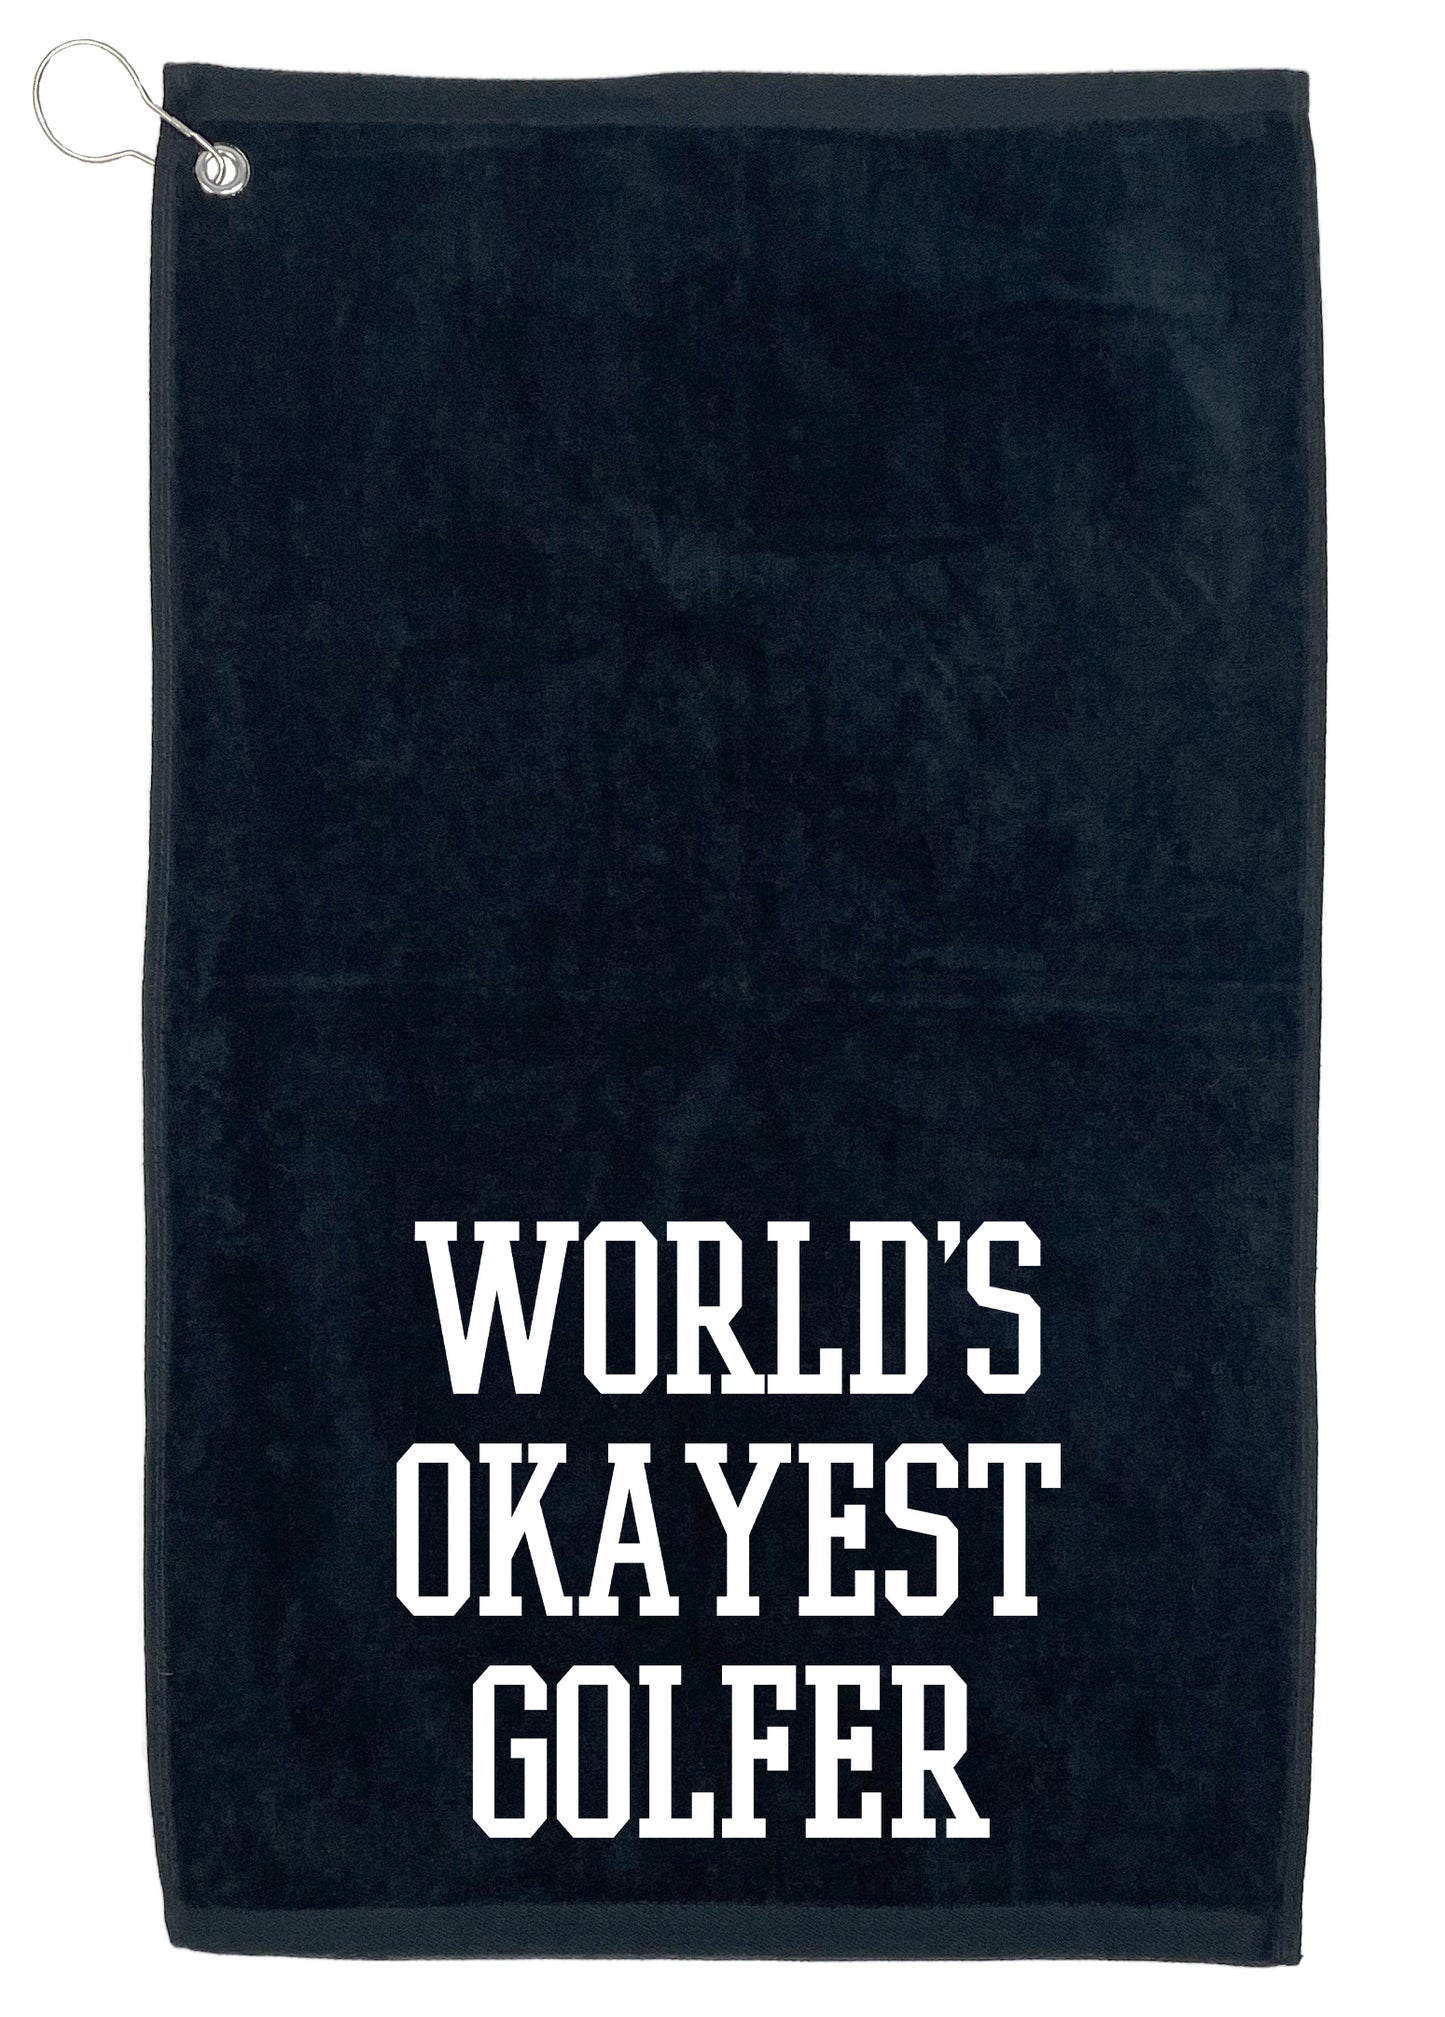 World's Okayest Golfer, Golf Towel - Funny T Shirts & Graphic Tees